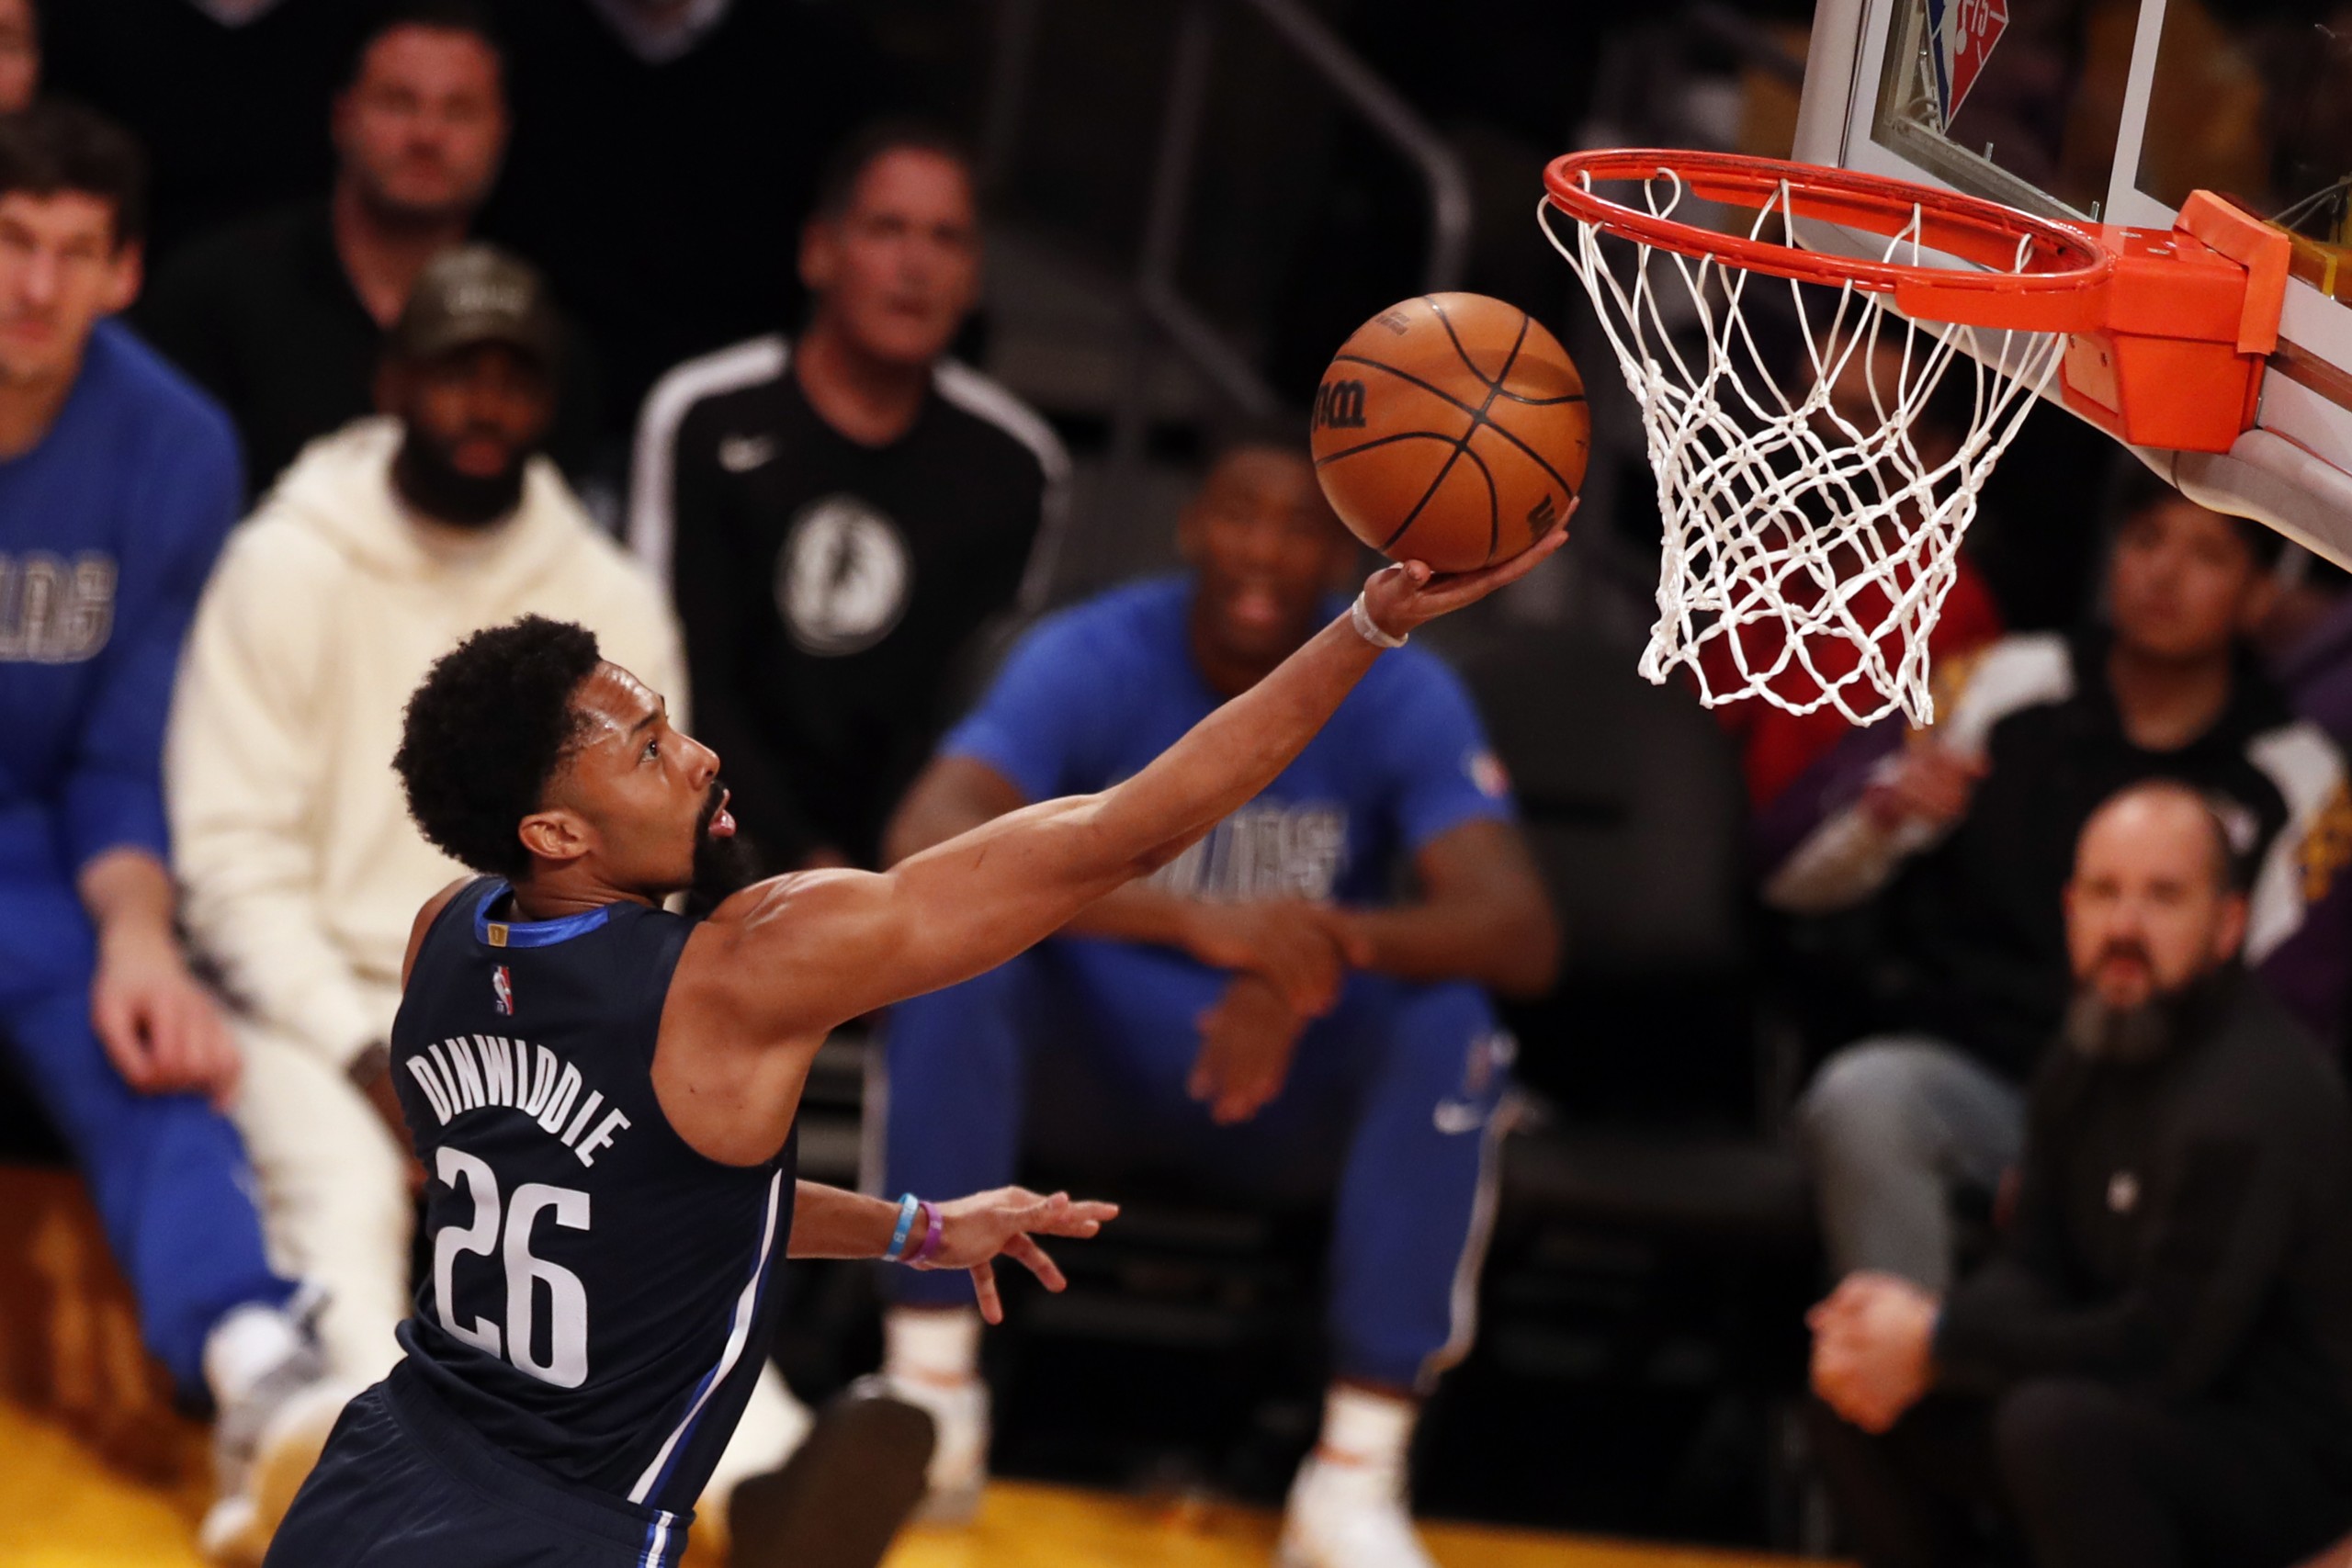 epa09795563 Dallas Mavericks guard Spencer Dinwiddie scores during the first quarter of the NBA basketball game between the Los Angeles Clippers and the Dallas Mavericks at the Crypto.com Arena in Los Angeles, California, USA, 01 March 2022.  EPA/ETIENNE LAURENT SHUTTERSTOCK OUT